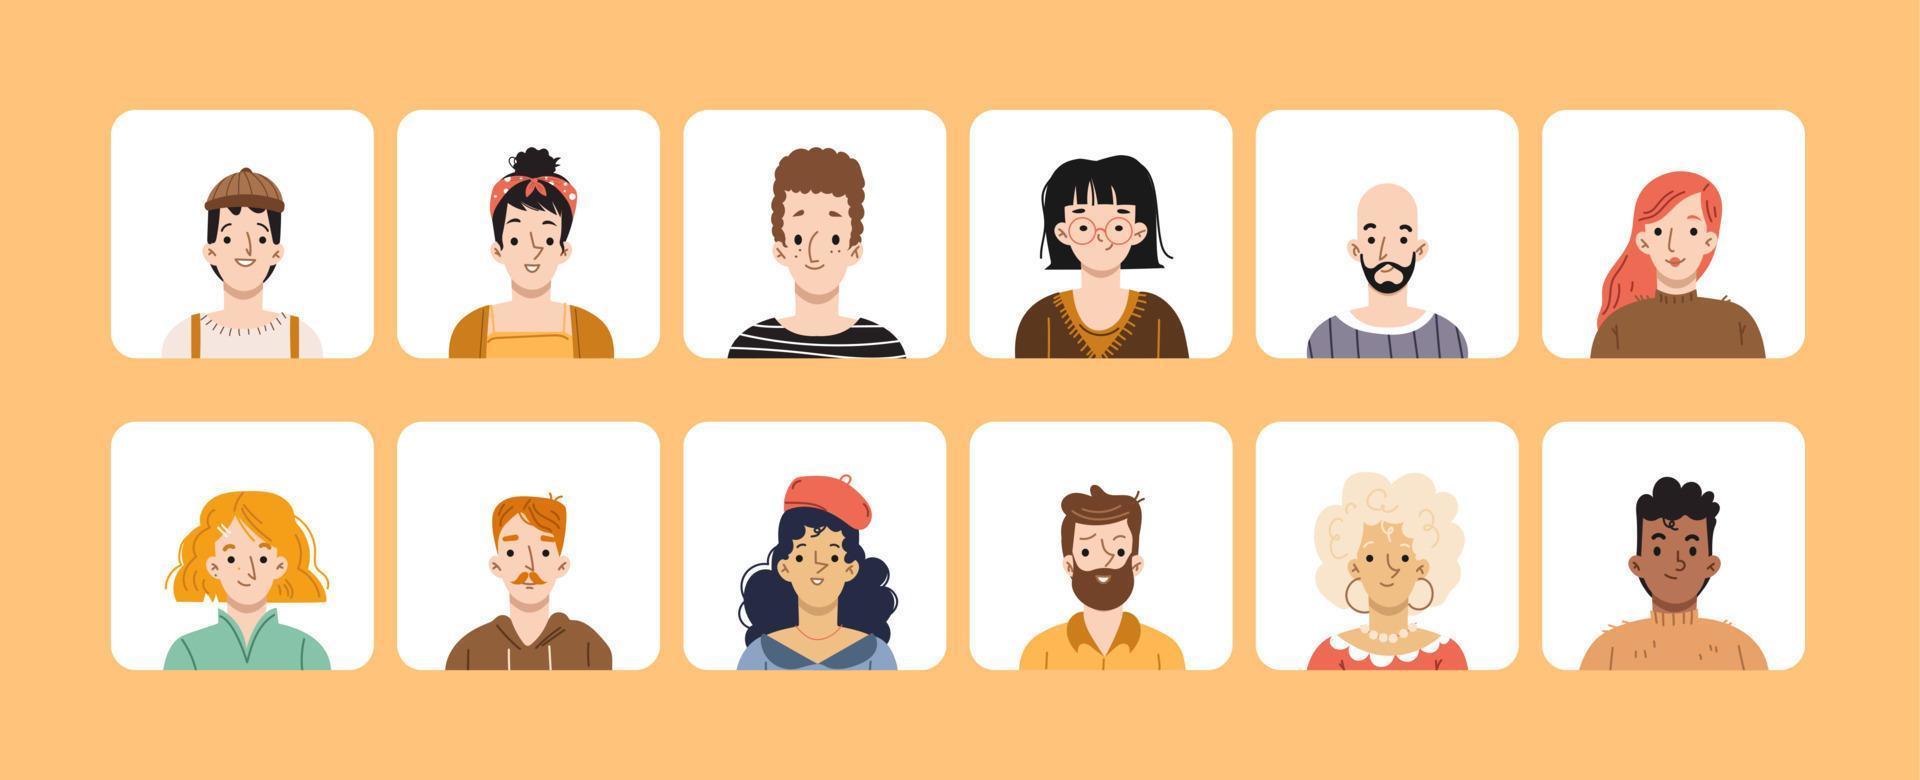 People avatars, square icons, different faces set vector